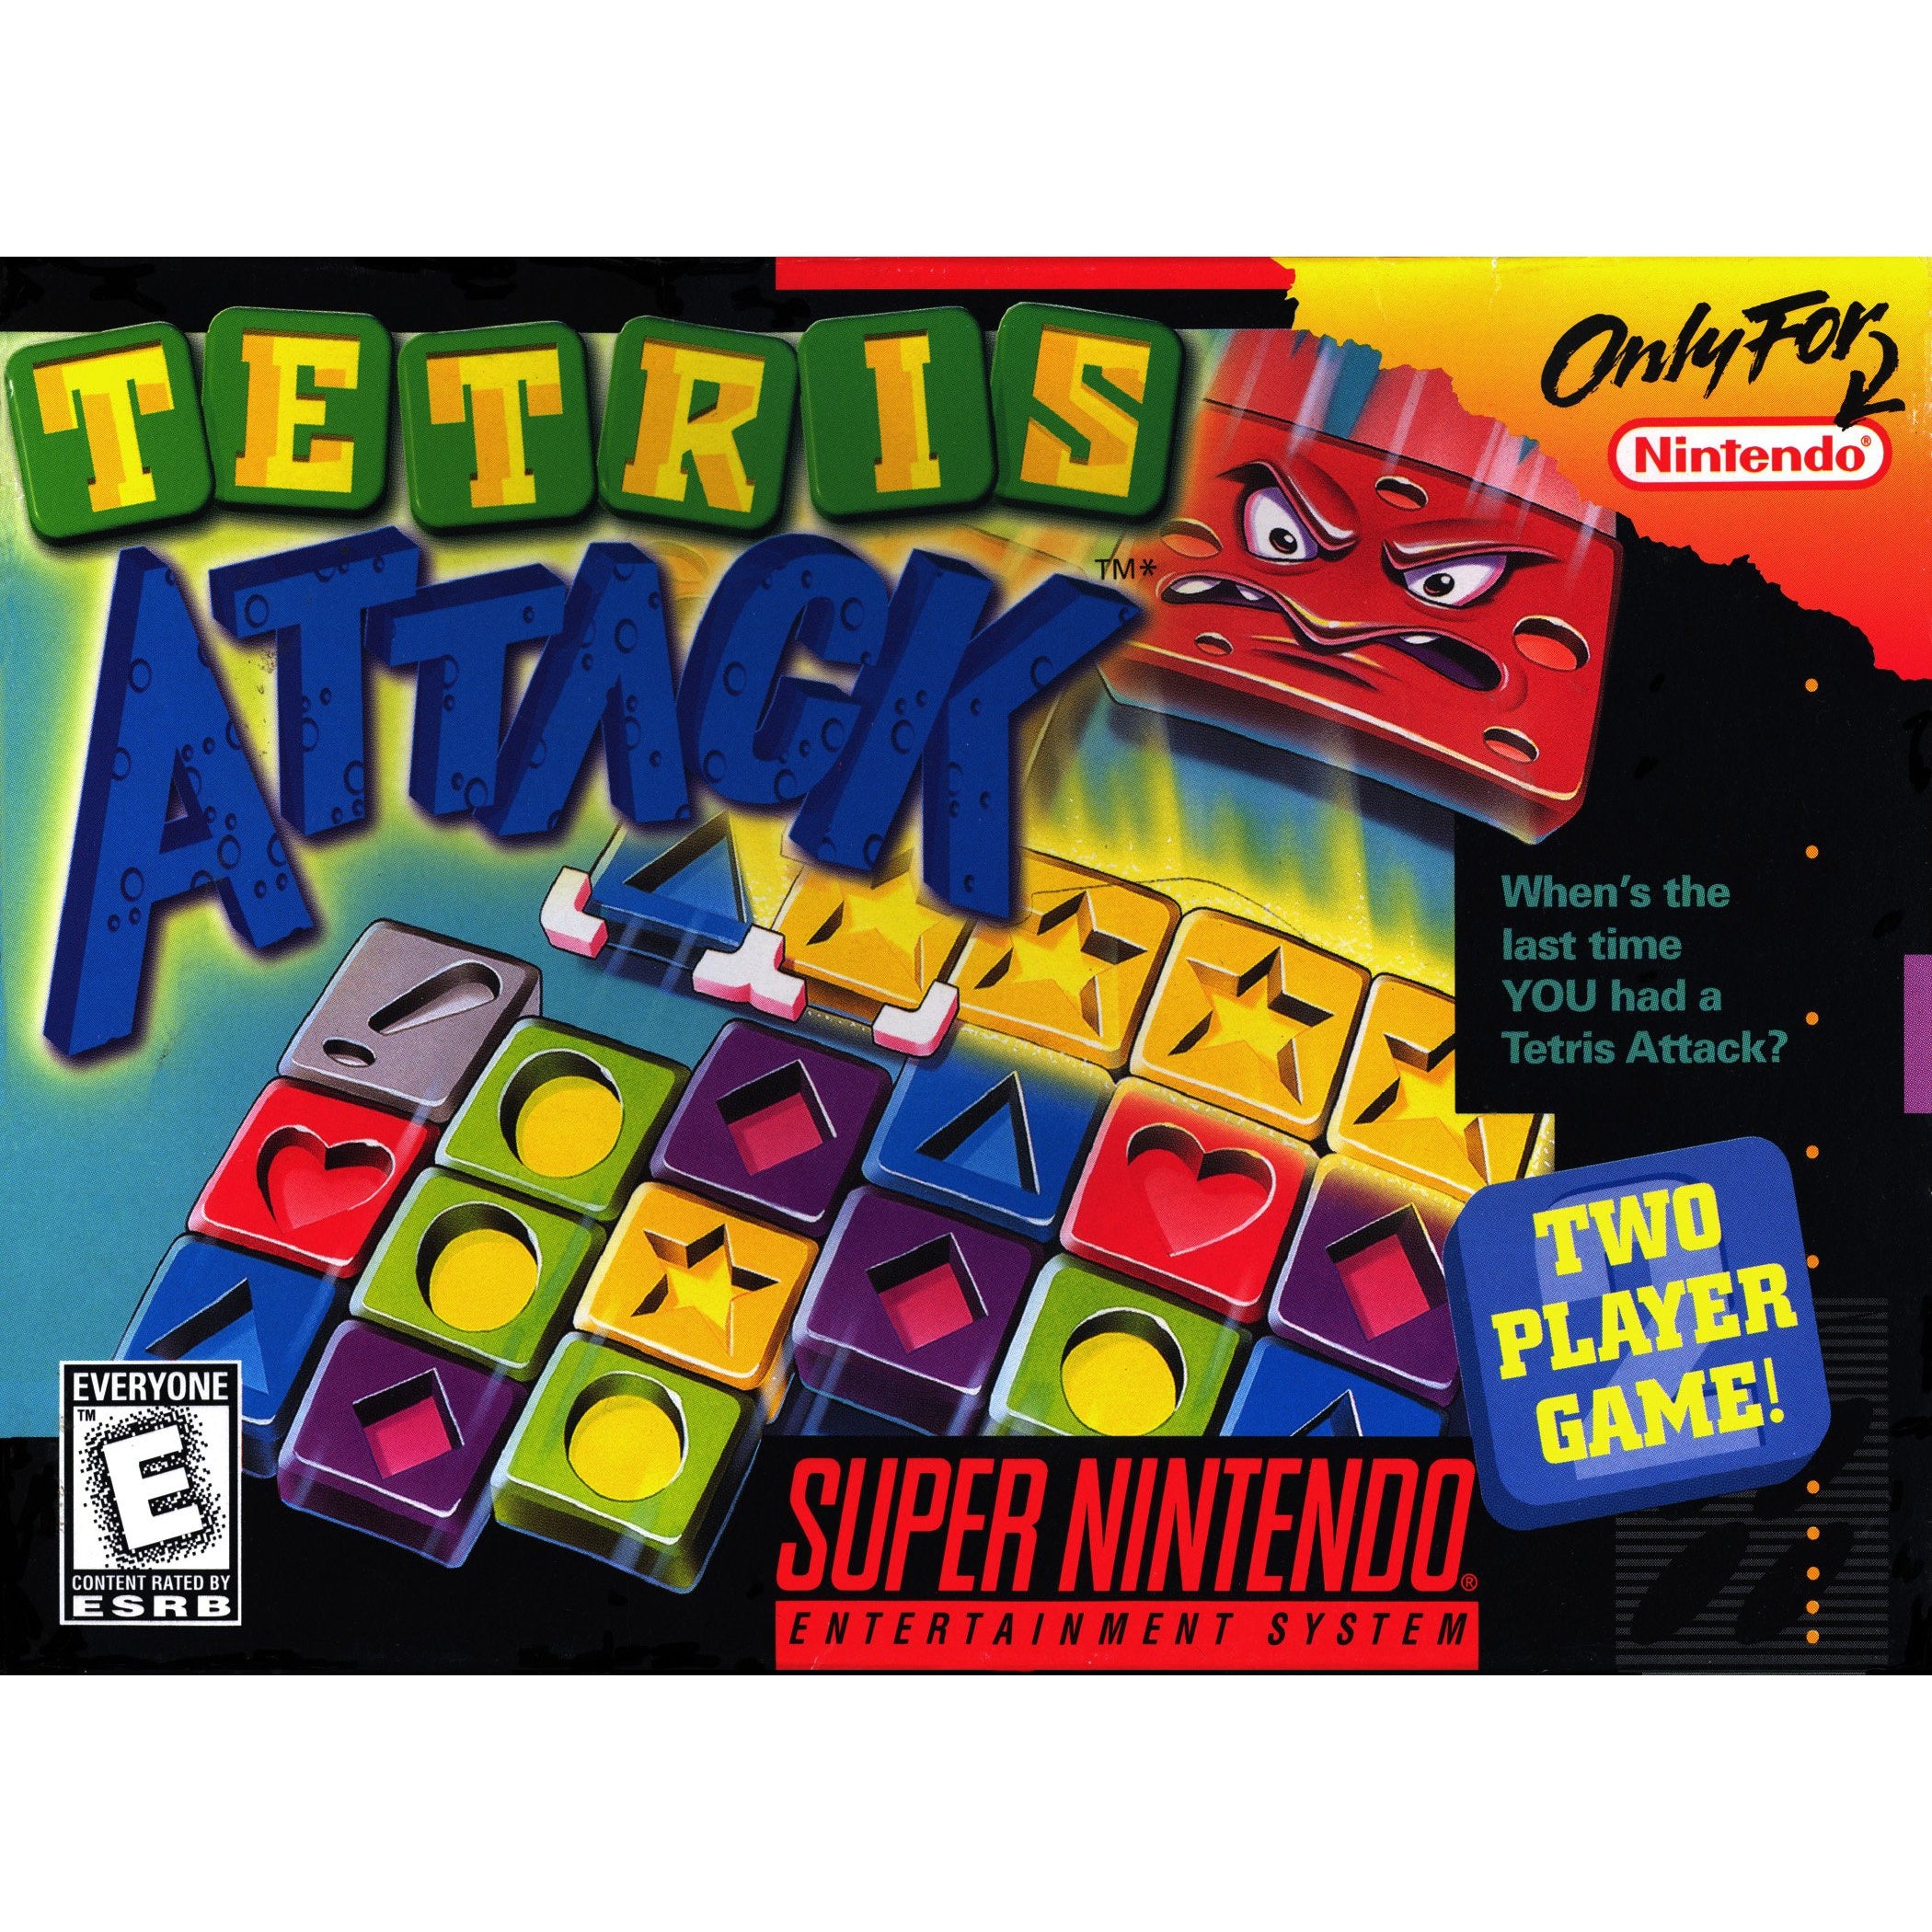 Tetris Attack - Super Nintendo (SNES) Game Cartridge - YourGamingShop.com - Buy, Sell, Trade Video Games Online. 120 Day Warranty. Satisfaction Guaranteed.